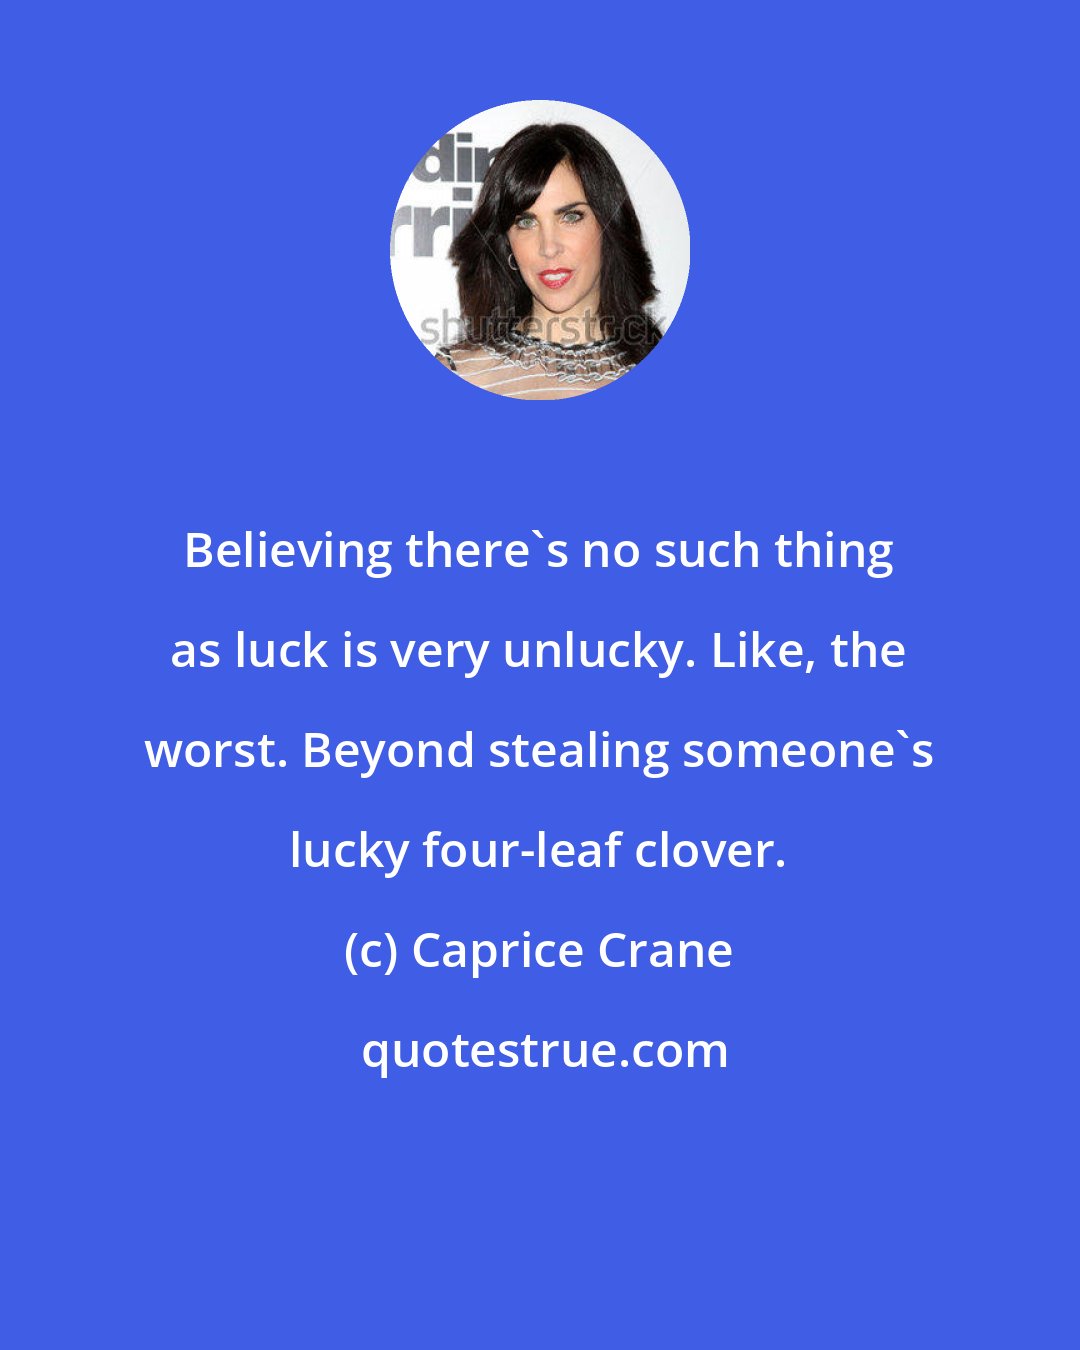 Caprice Crane: Believing there's no such thing as luck is very unlucky. Like, the worst. Beyond stealing someone's lucky four-leaf clover.